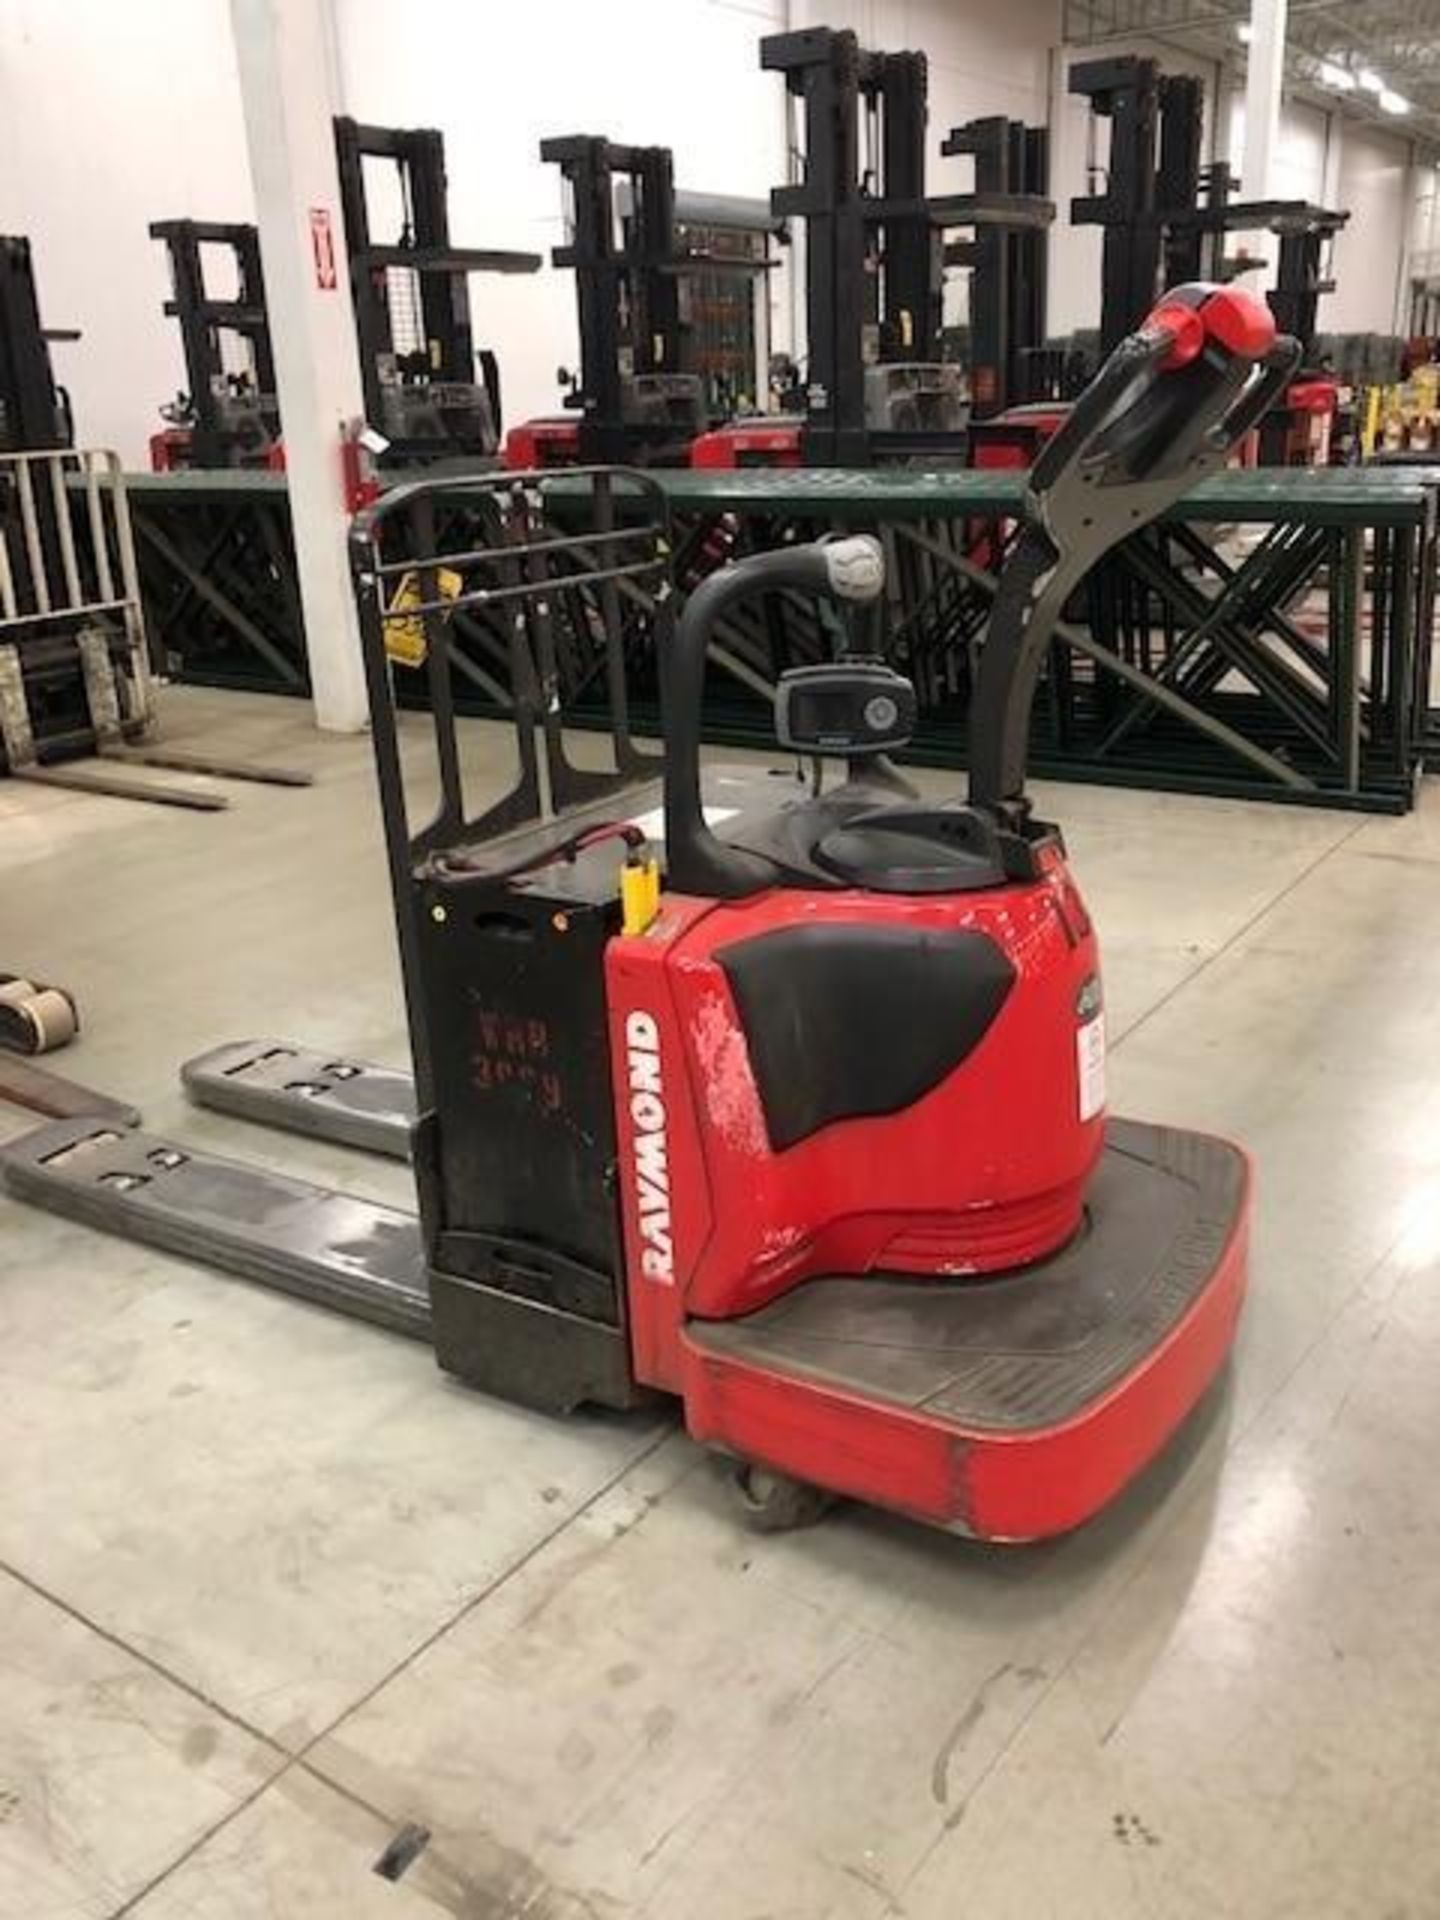 2013 RAYMOND 6,000 LB. CAPACITY ELECTRIC PALLET TRUCK; MODEL 8410, S/N 841-13-17109, WITH IWAREHOUSE - Image 5 of 8